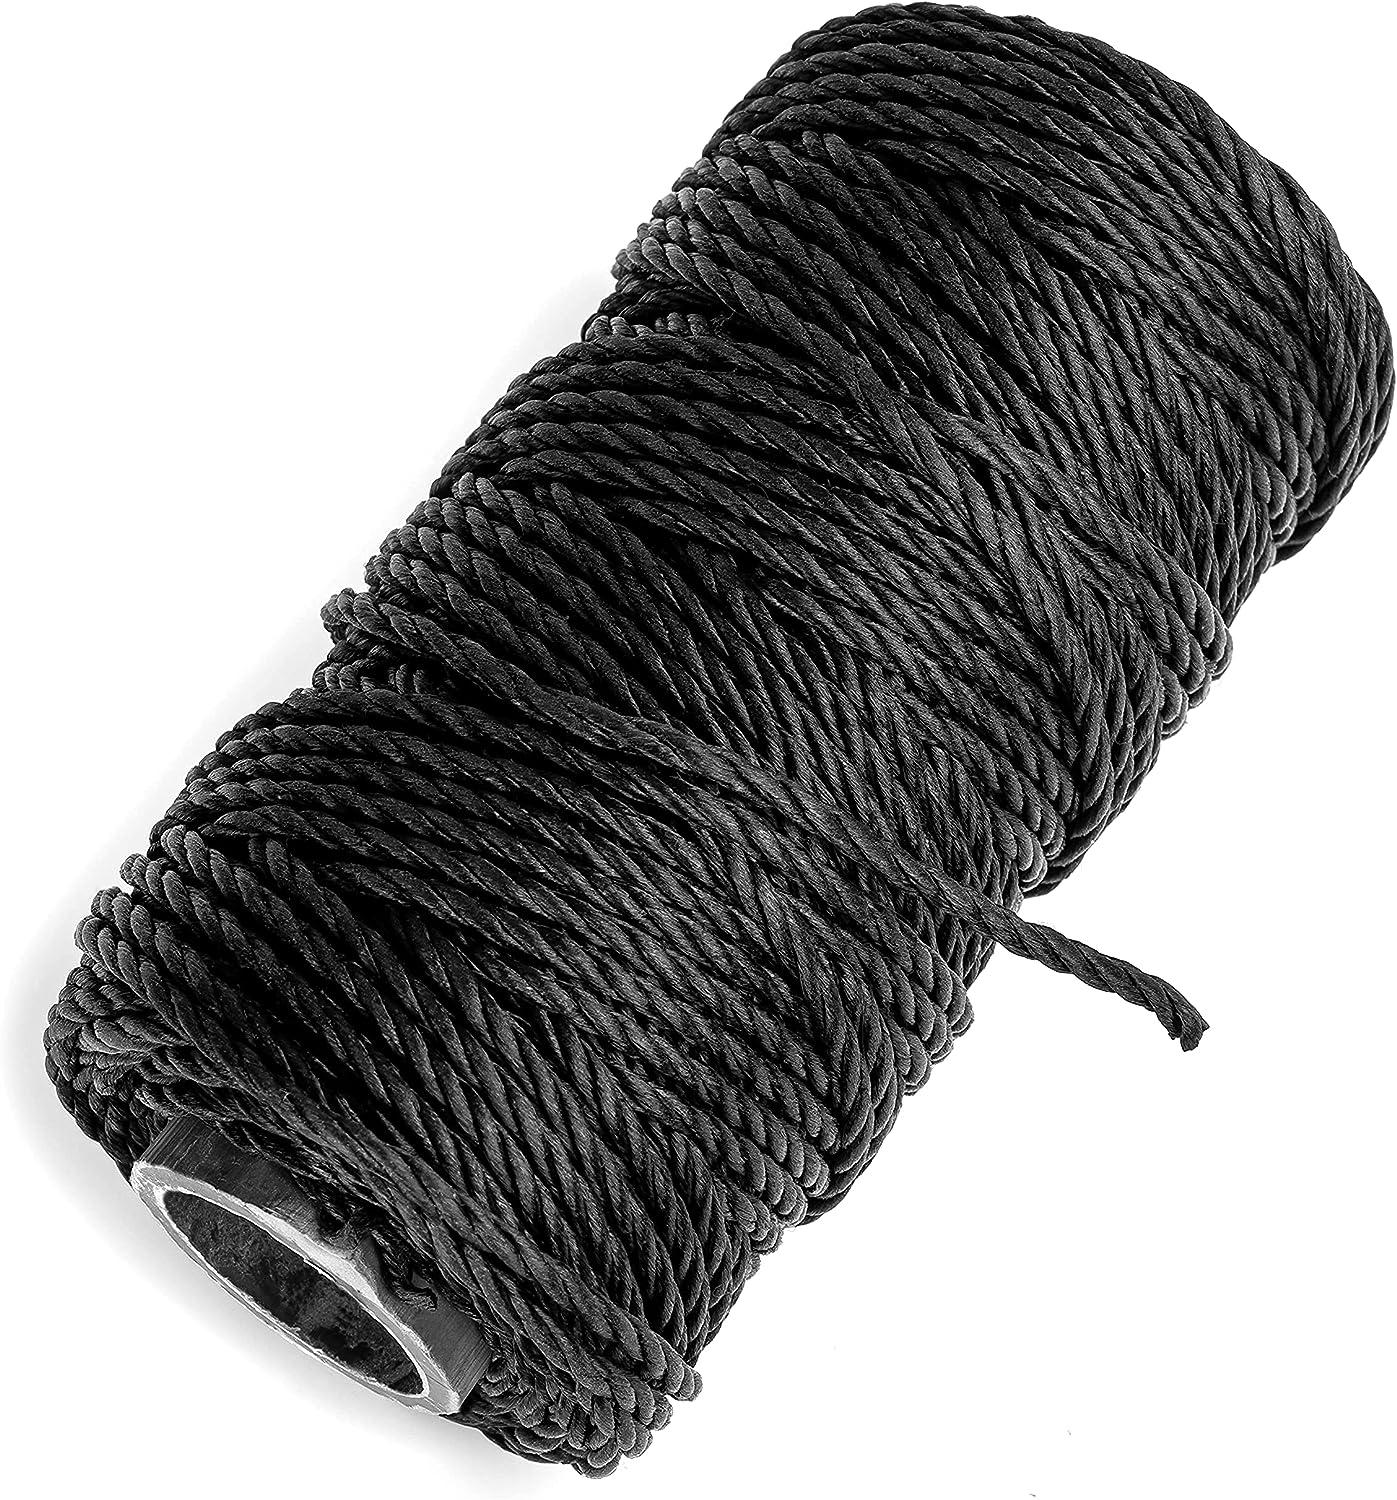 Texas Bushcraft Tarred Bank Line Twine - #36 Black Nylon String for  Fishing, Camping and Outdoor Survival Strong, Weather Resistant Bankline  Cordage for Trotline 1/4 lb - #36 (121 ft) Braided